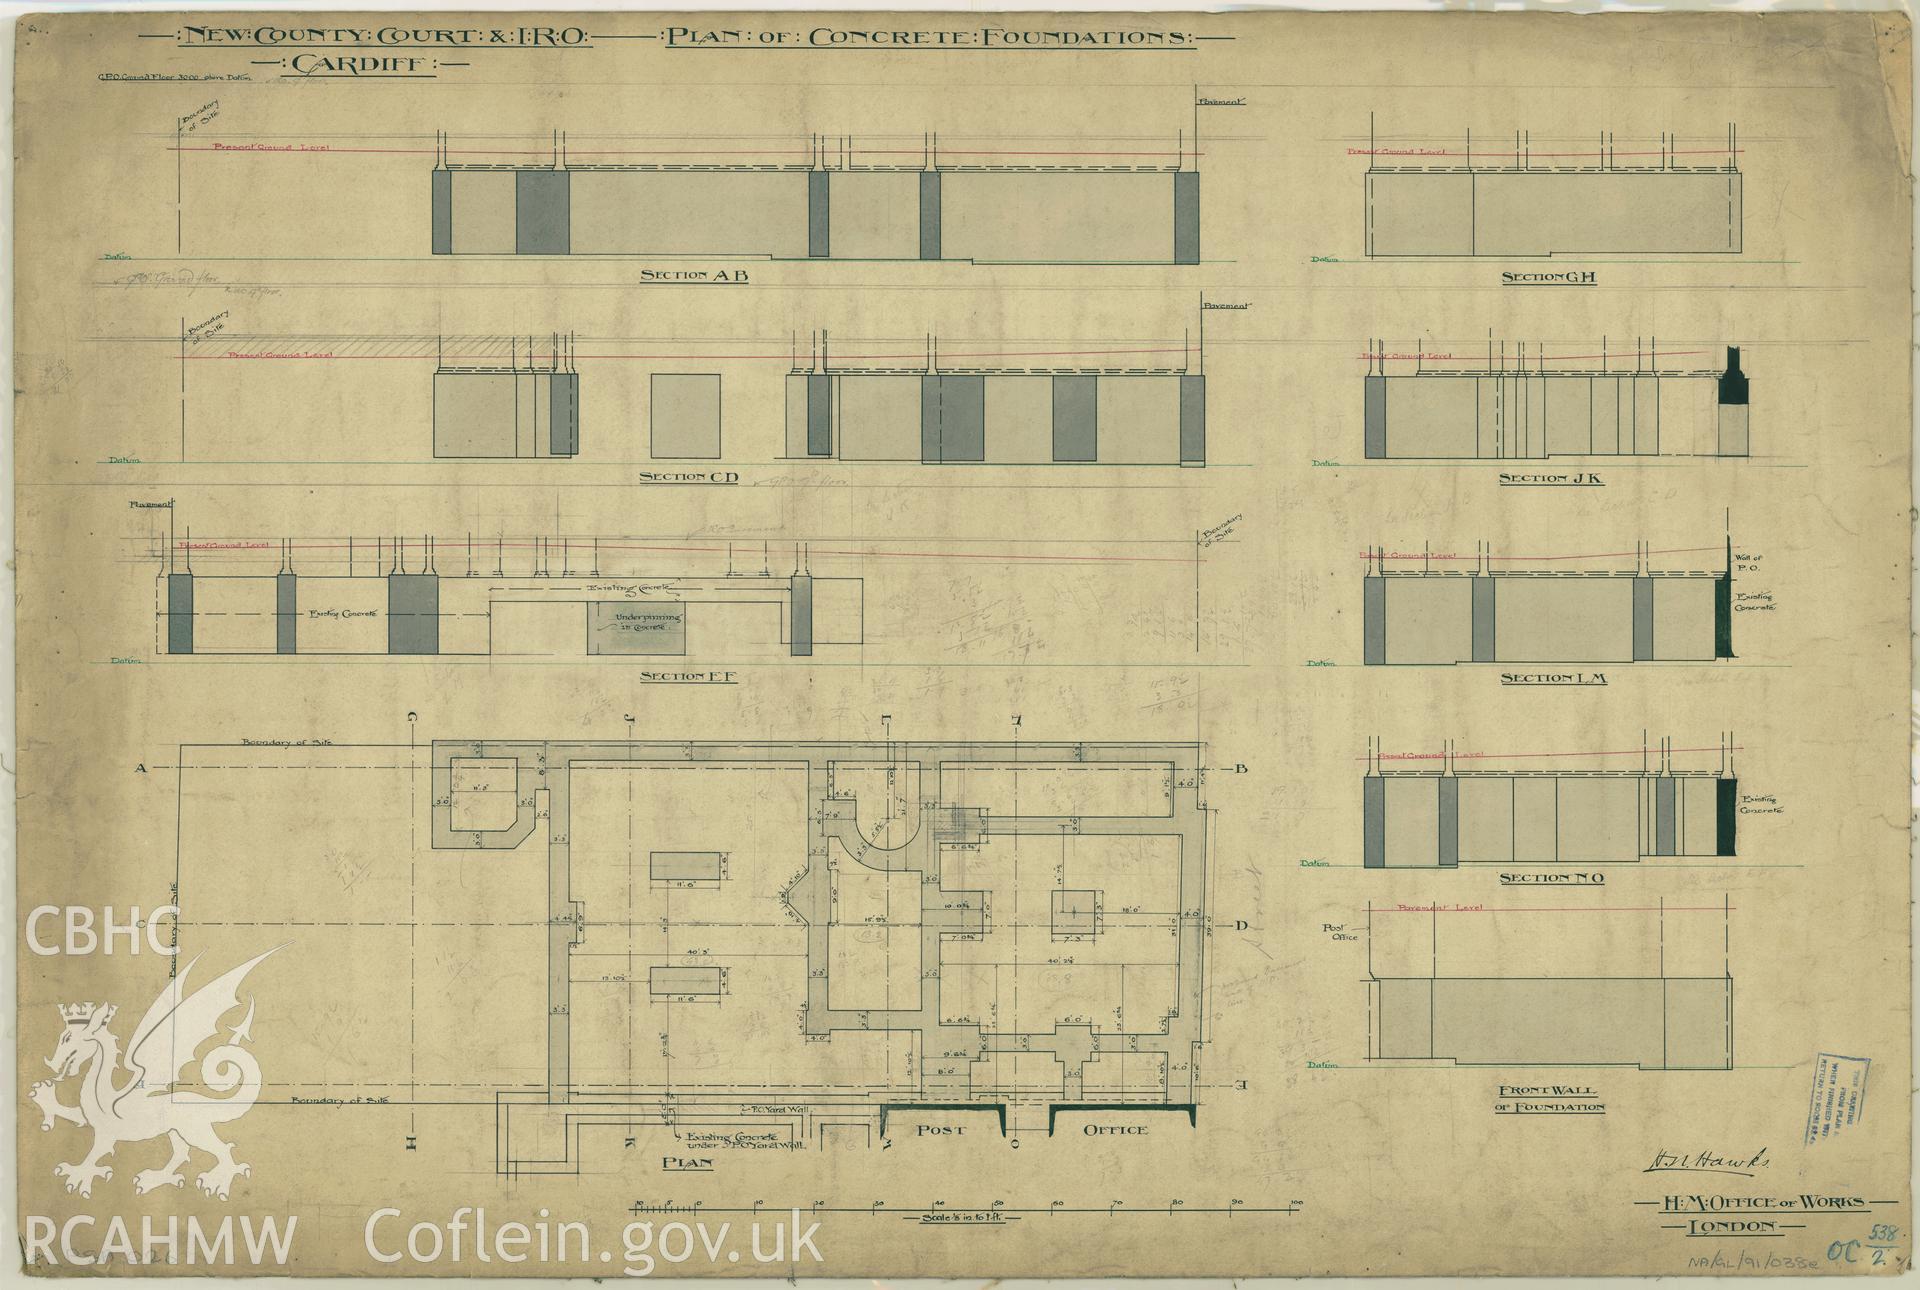 Cardiff Inland Revenue and County Court Offices; measured drawing showing plan of concrete foundations, produced by H.M. Office of Works,  undated.